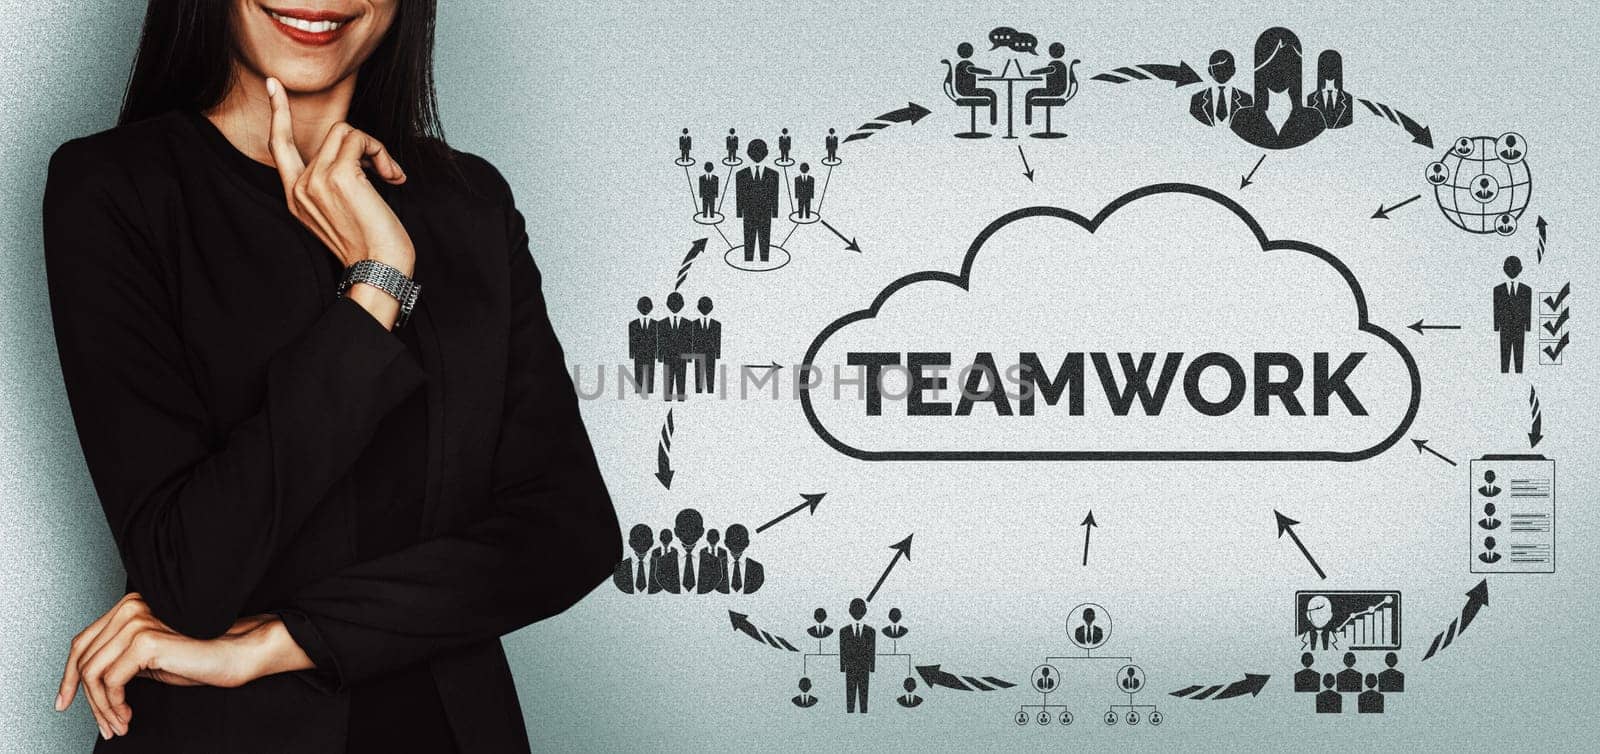 Teamwork and Business Human Resources Concept uds by biancoblue